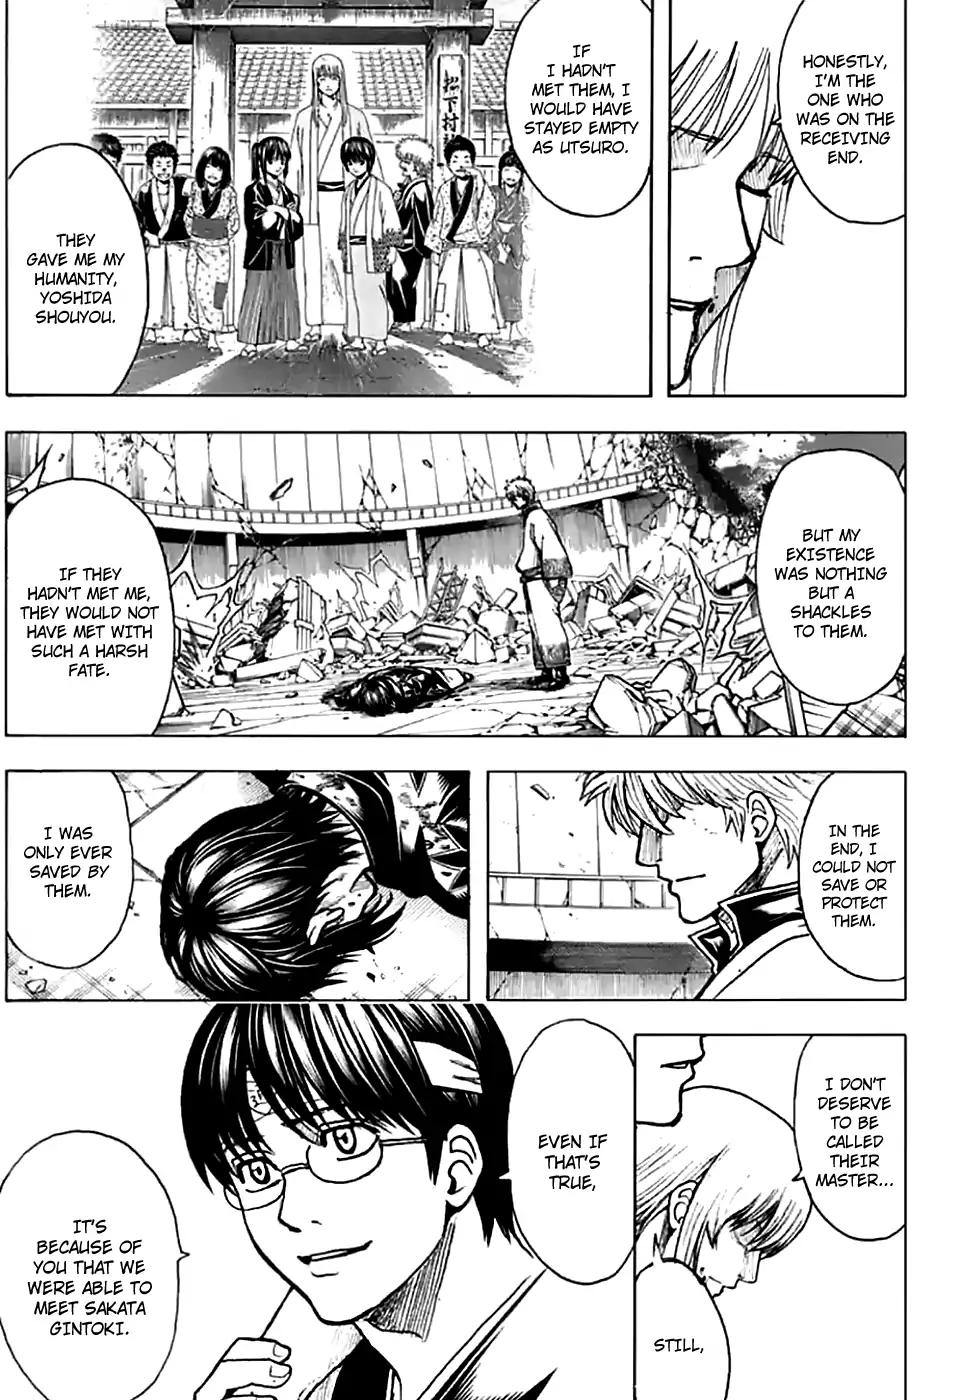 Gintama chapter 703 page 32